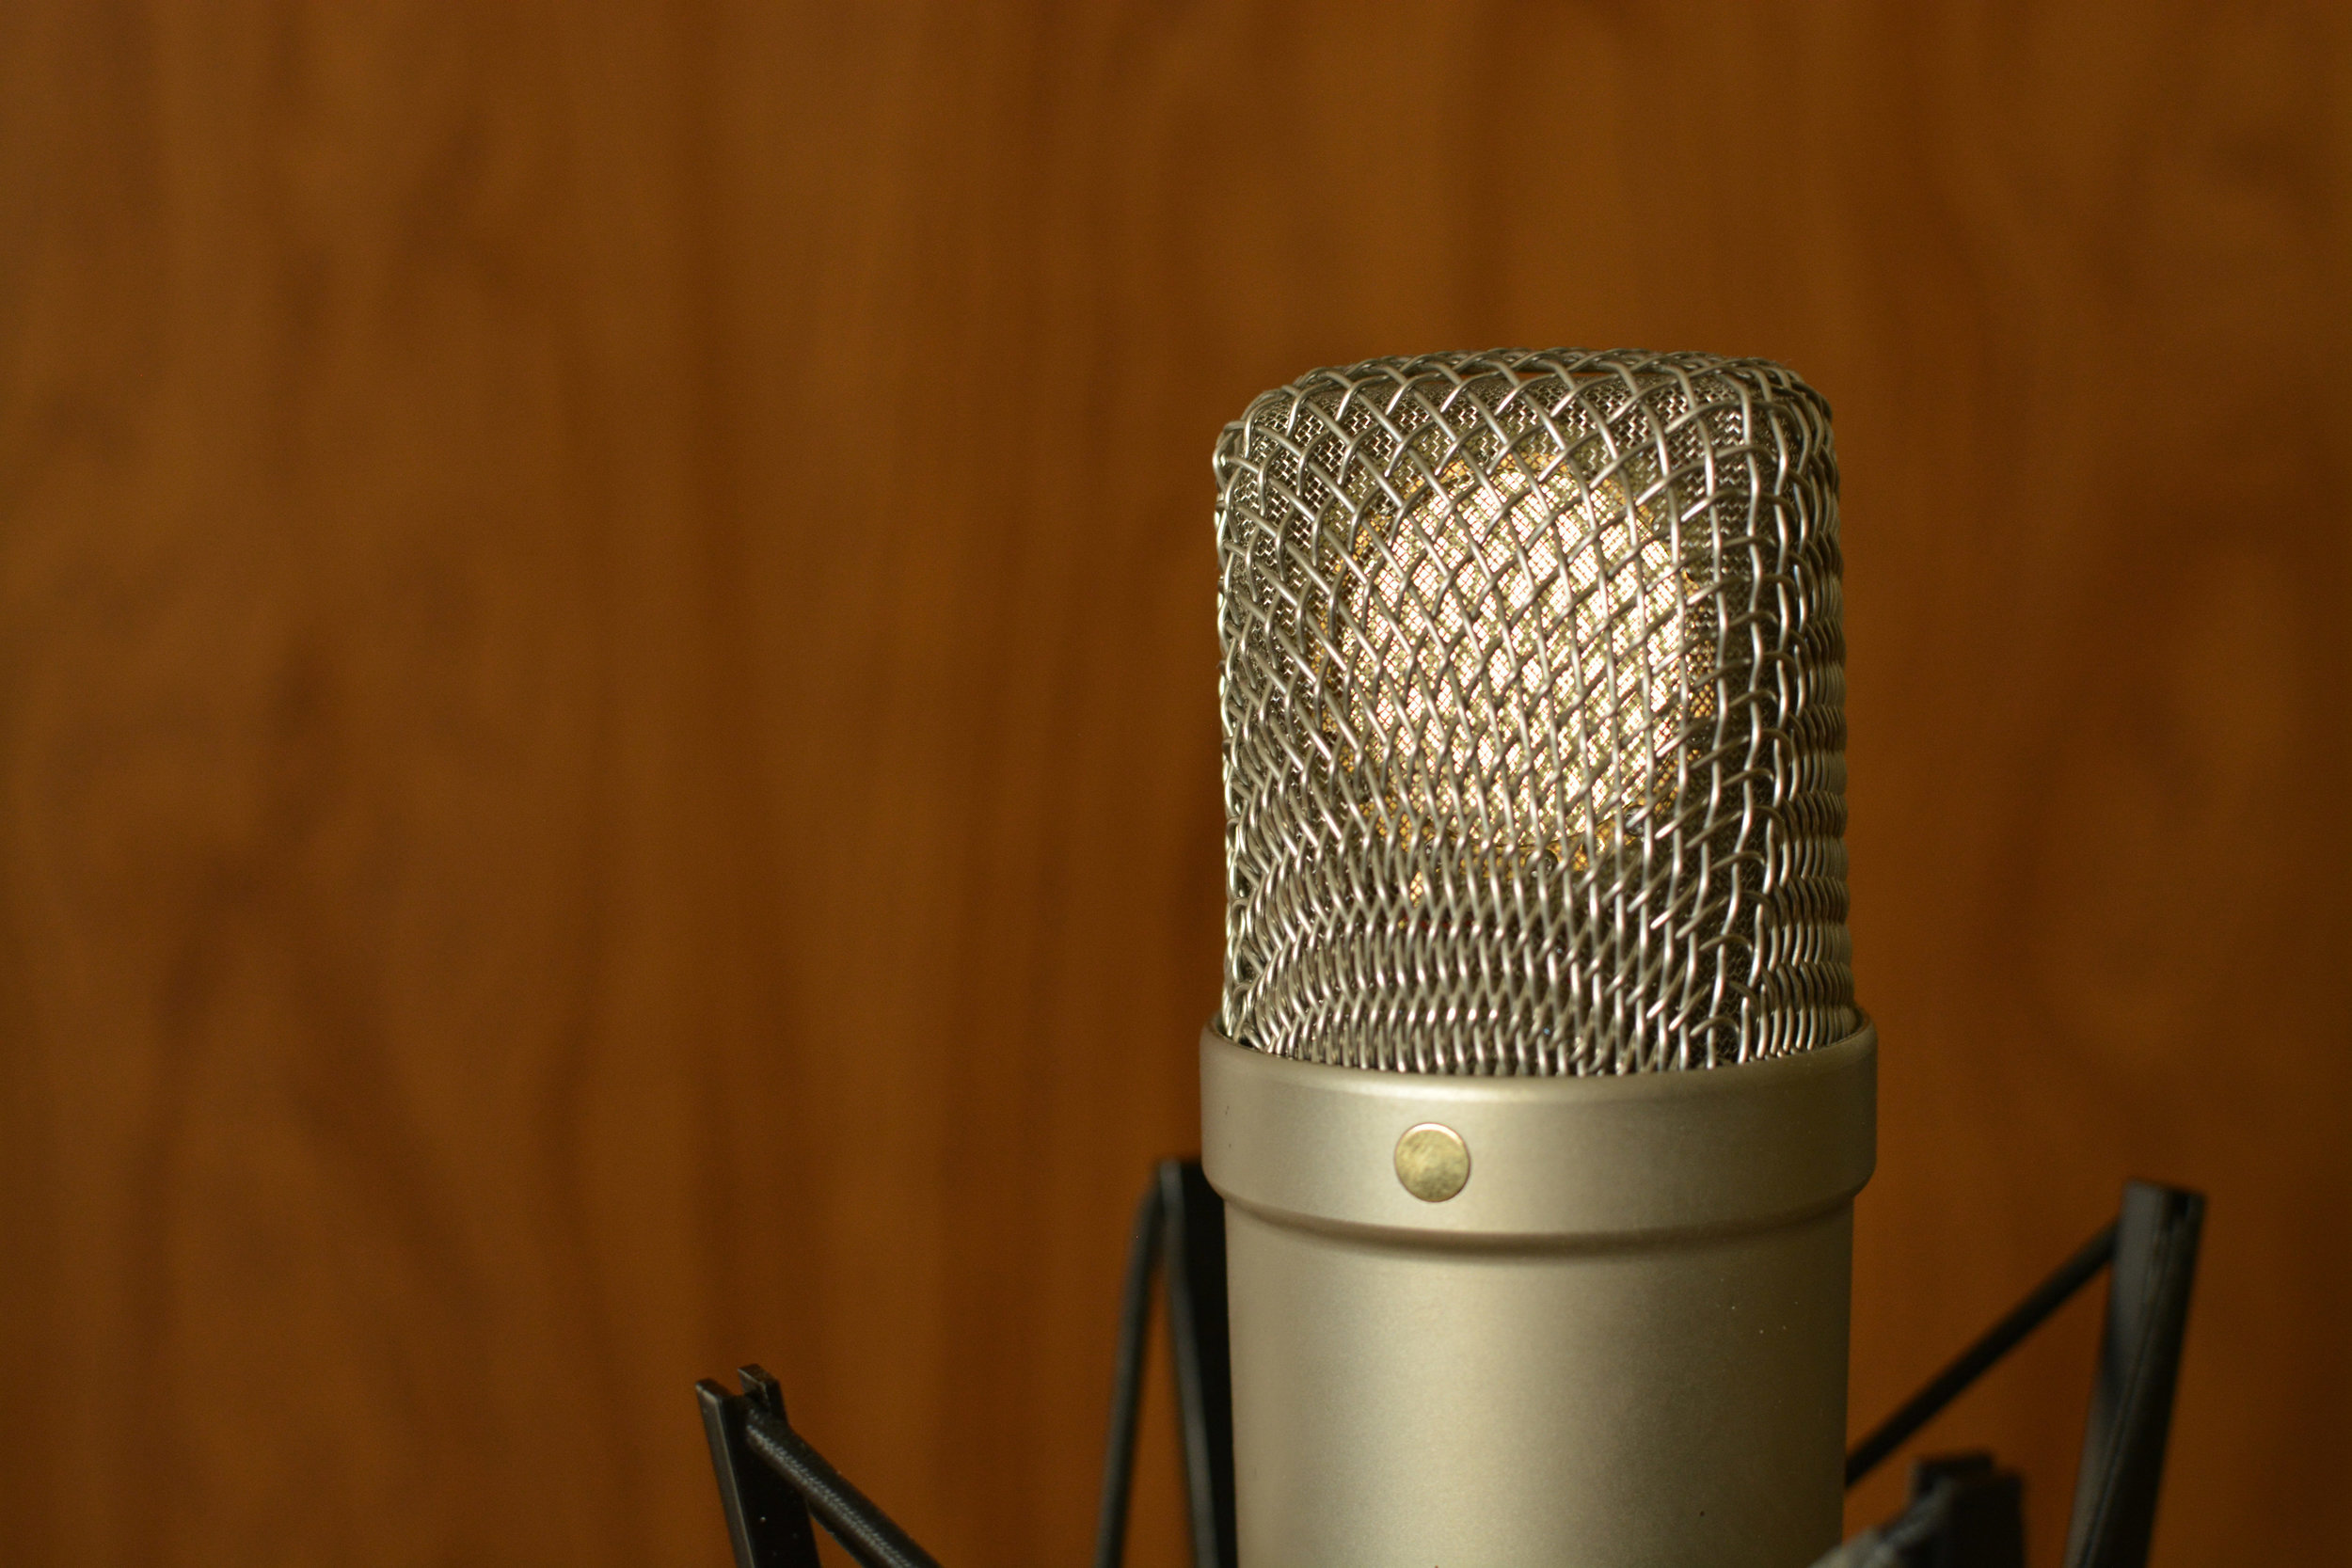  Rode NT1-A Large-Diaphragm Condenser Microphone : Everything  Else